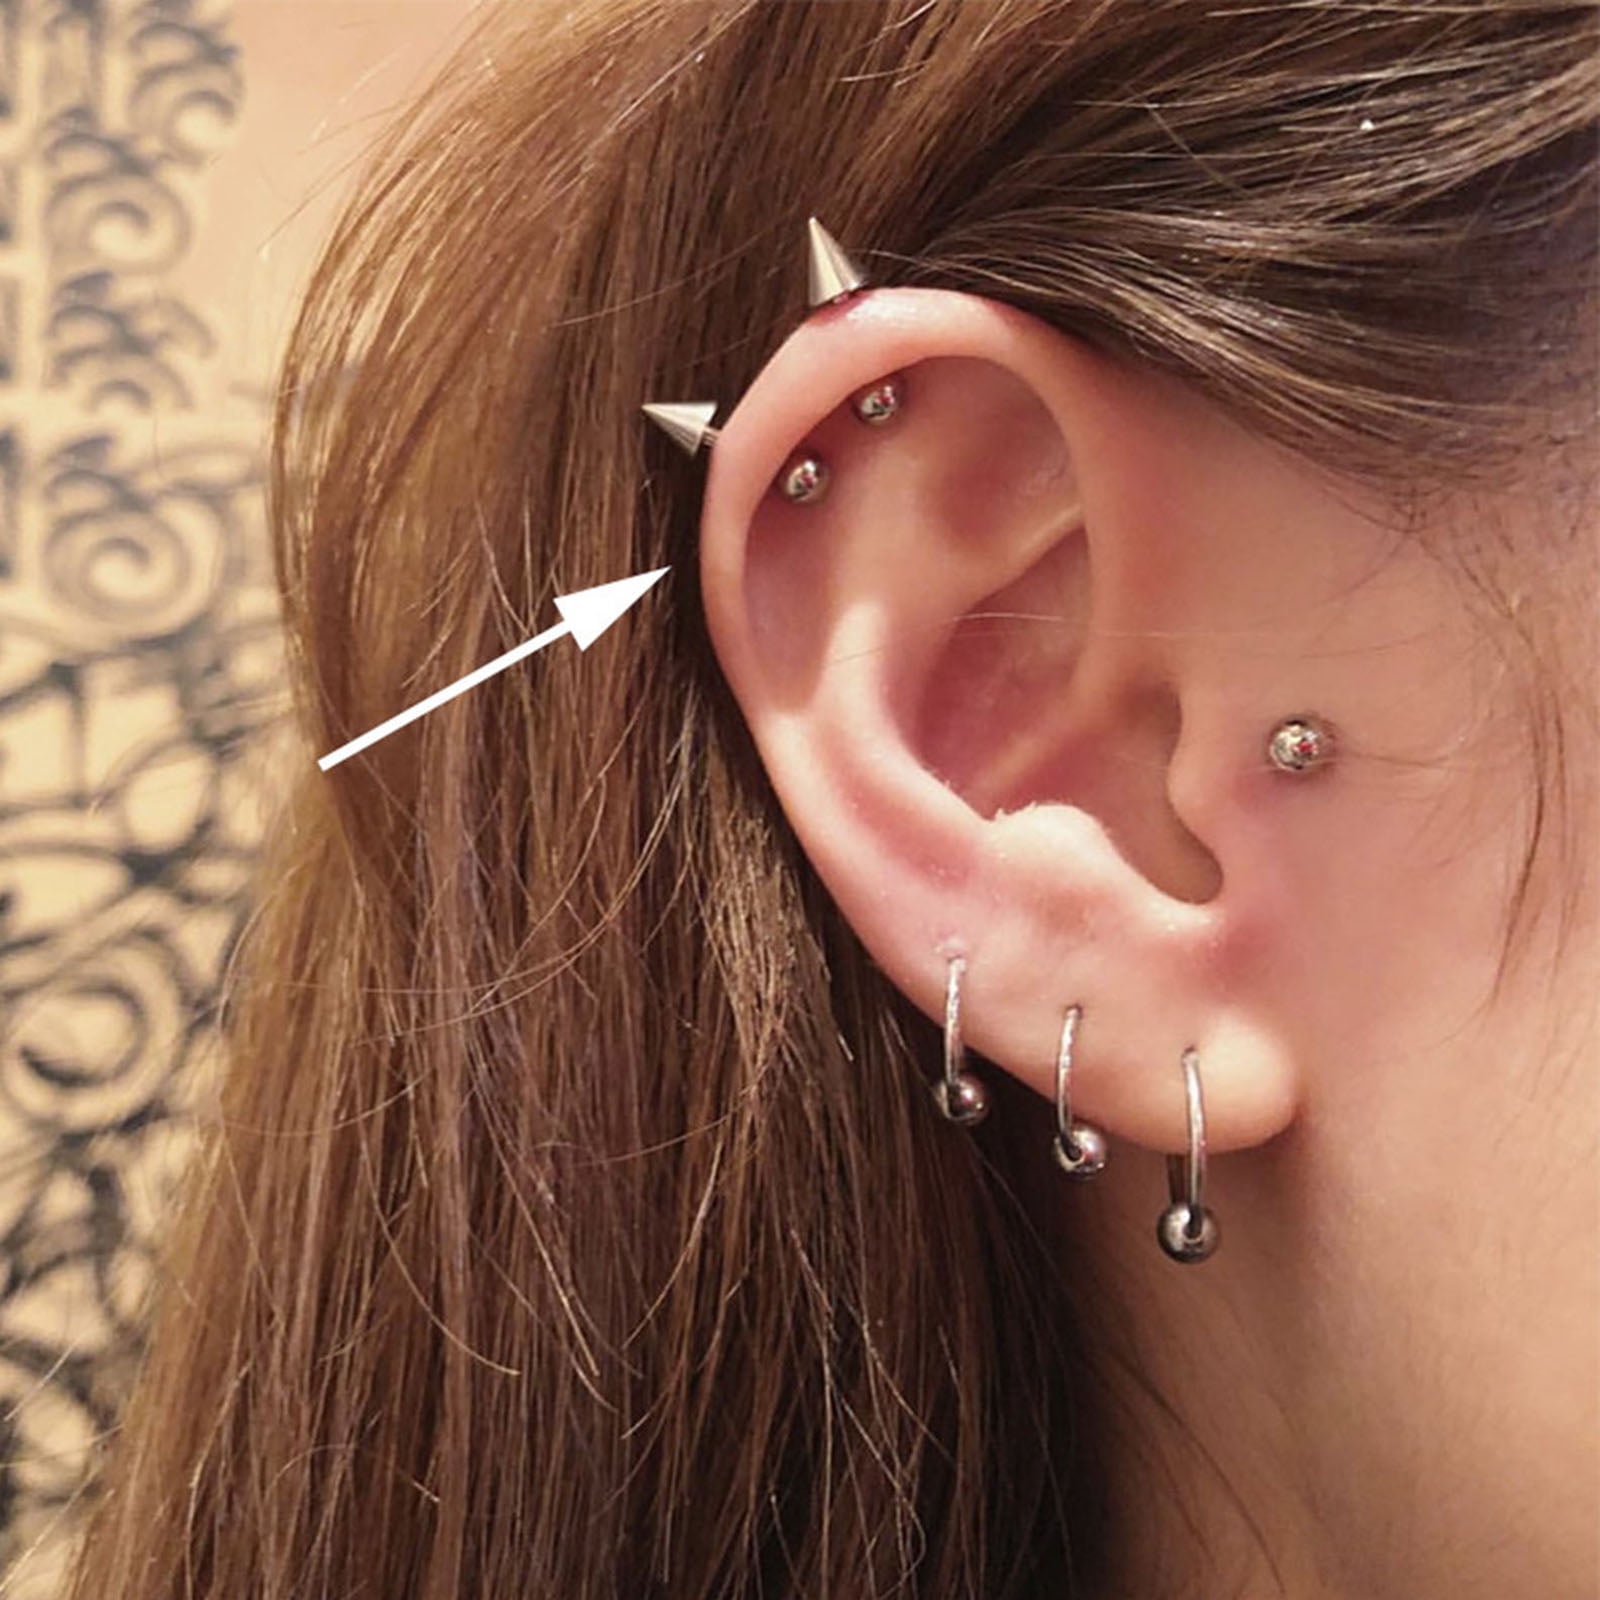 Getting Your Ears Pierced: Everything You Need to Know | Maison Miru